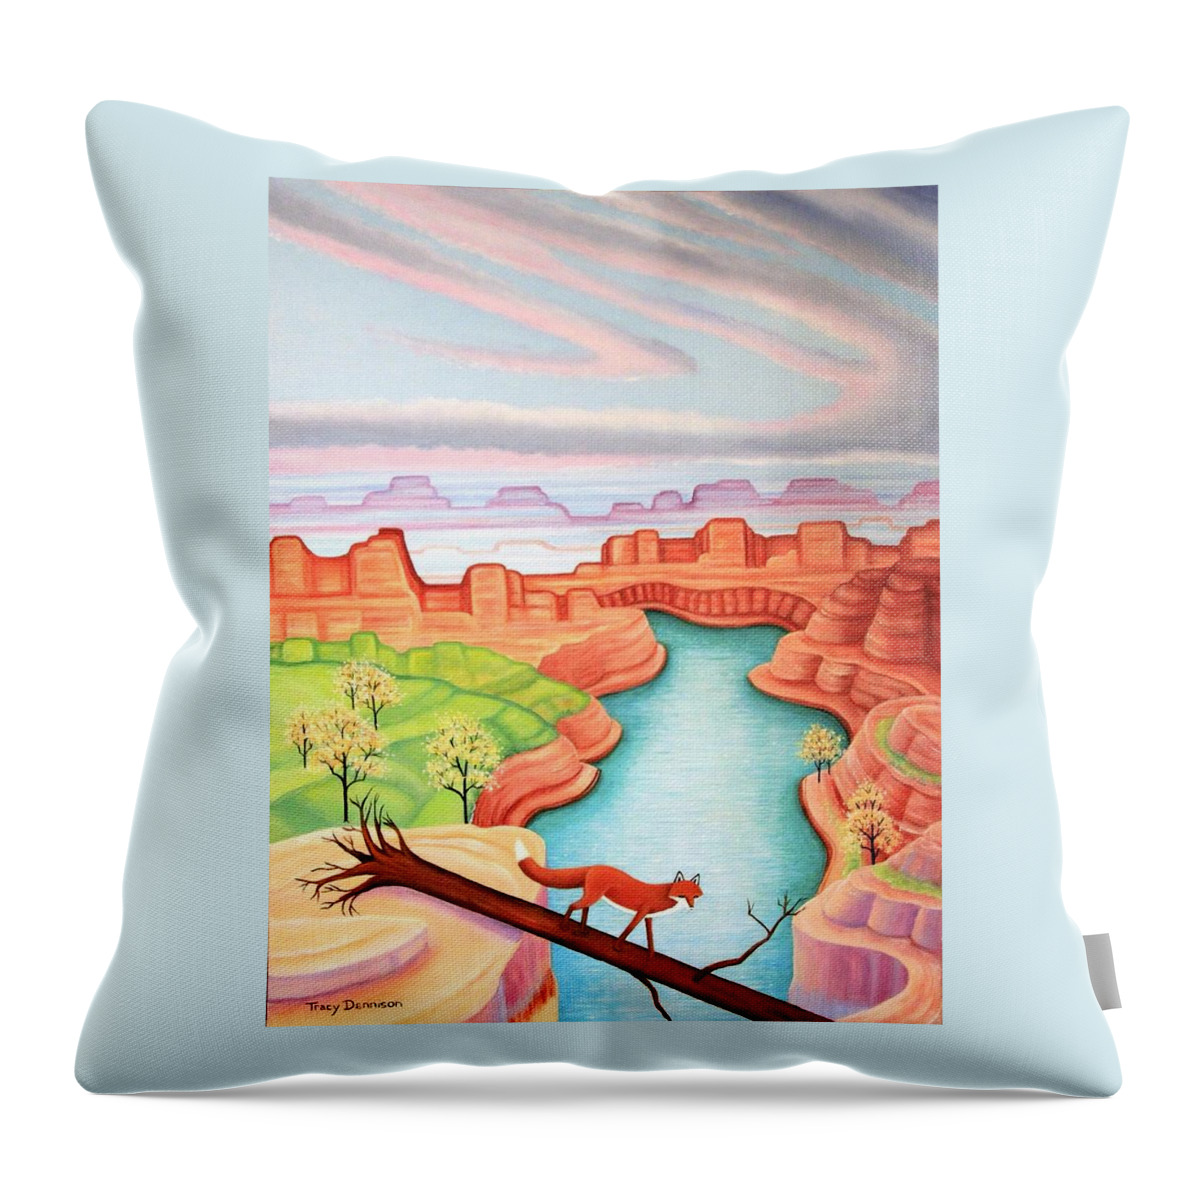 Red Fox Southwest Sunset Throw Pillow featuring the painting Fox Trotting by Tracy Dennison